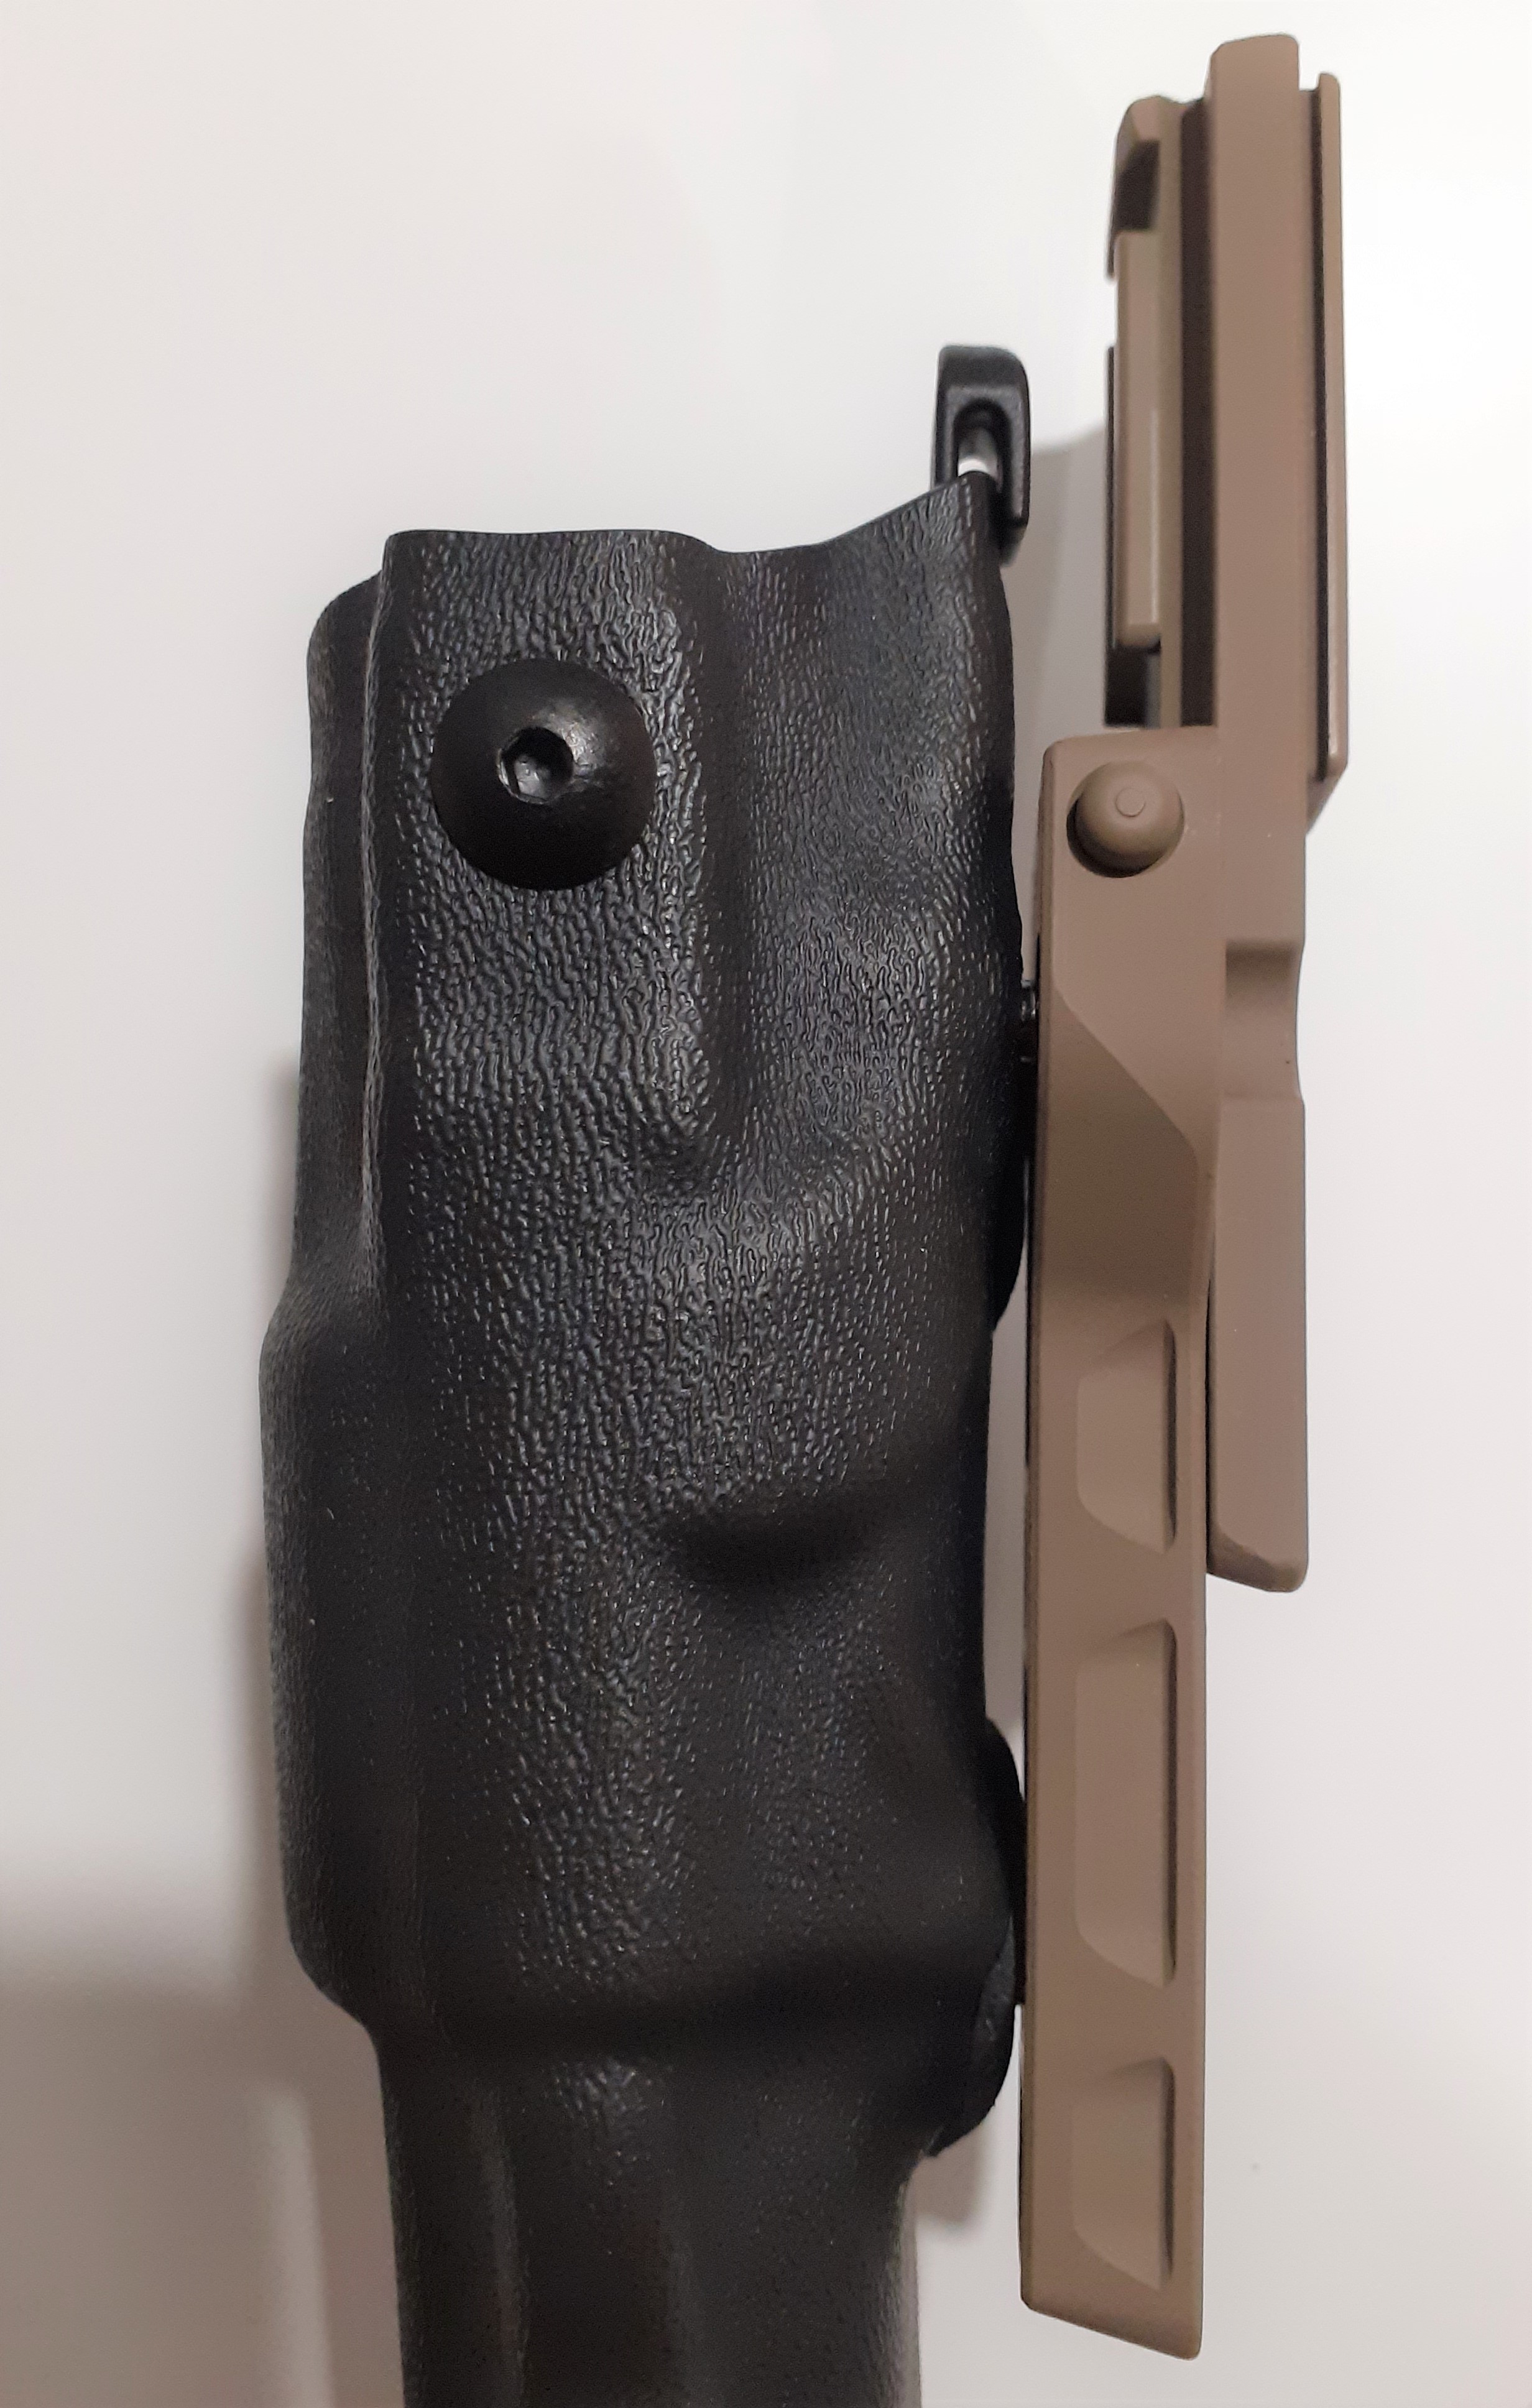 Review – S&S Precision Gear Retention Track & Holster Extender